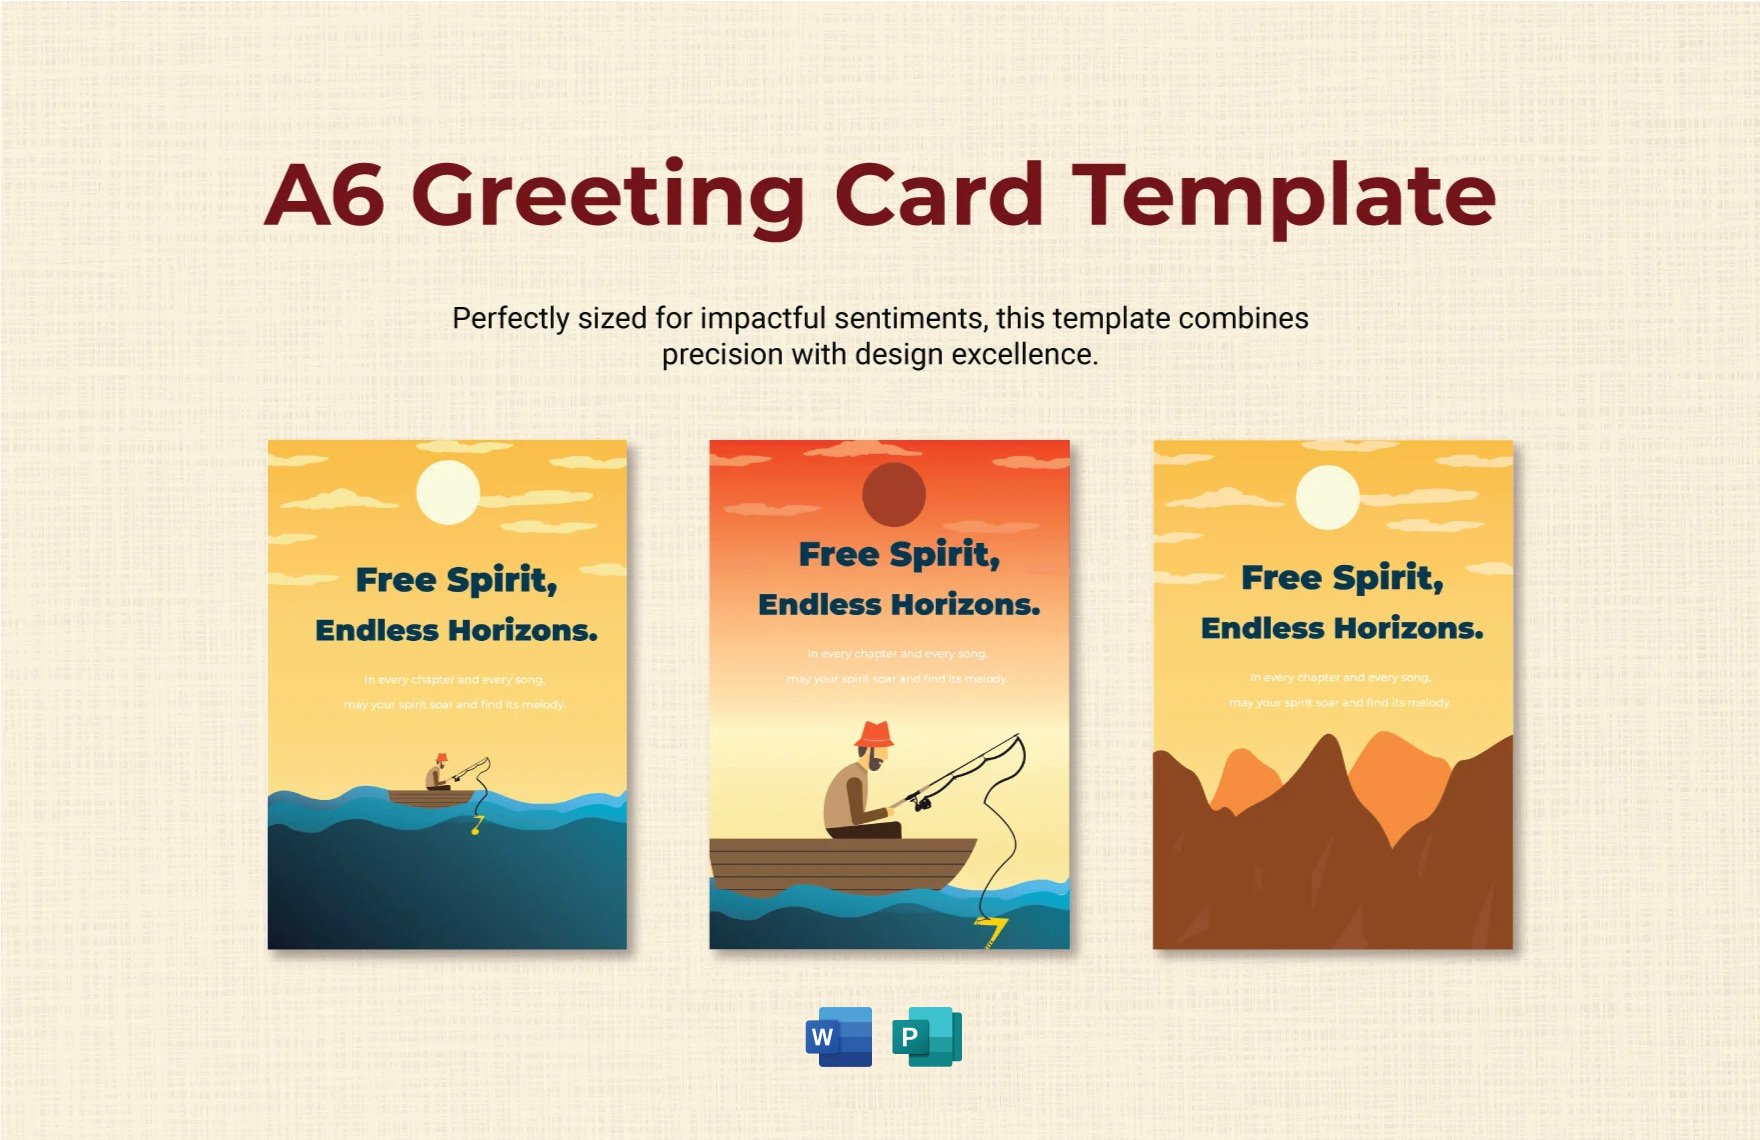 A6 Greeting Card Template